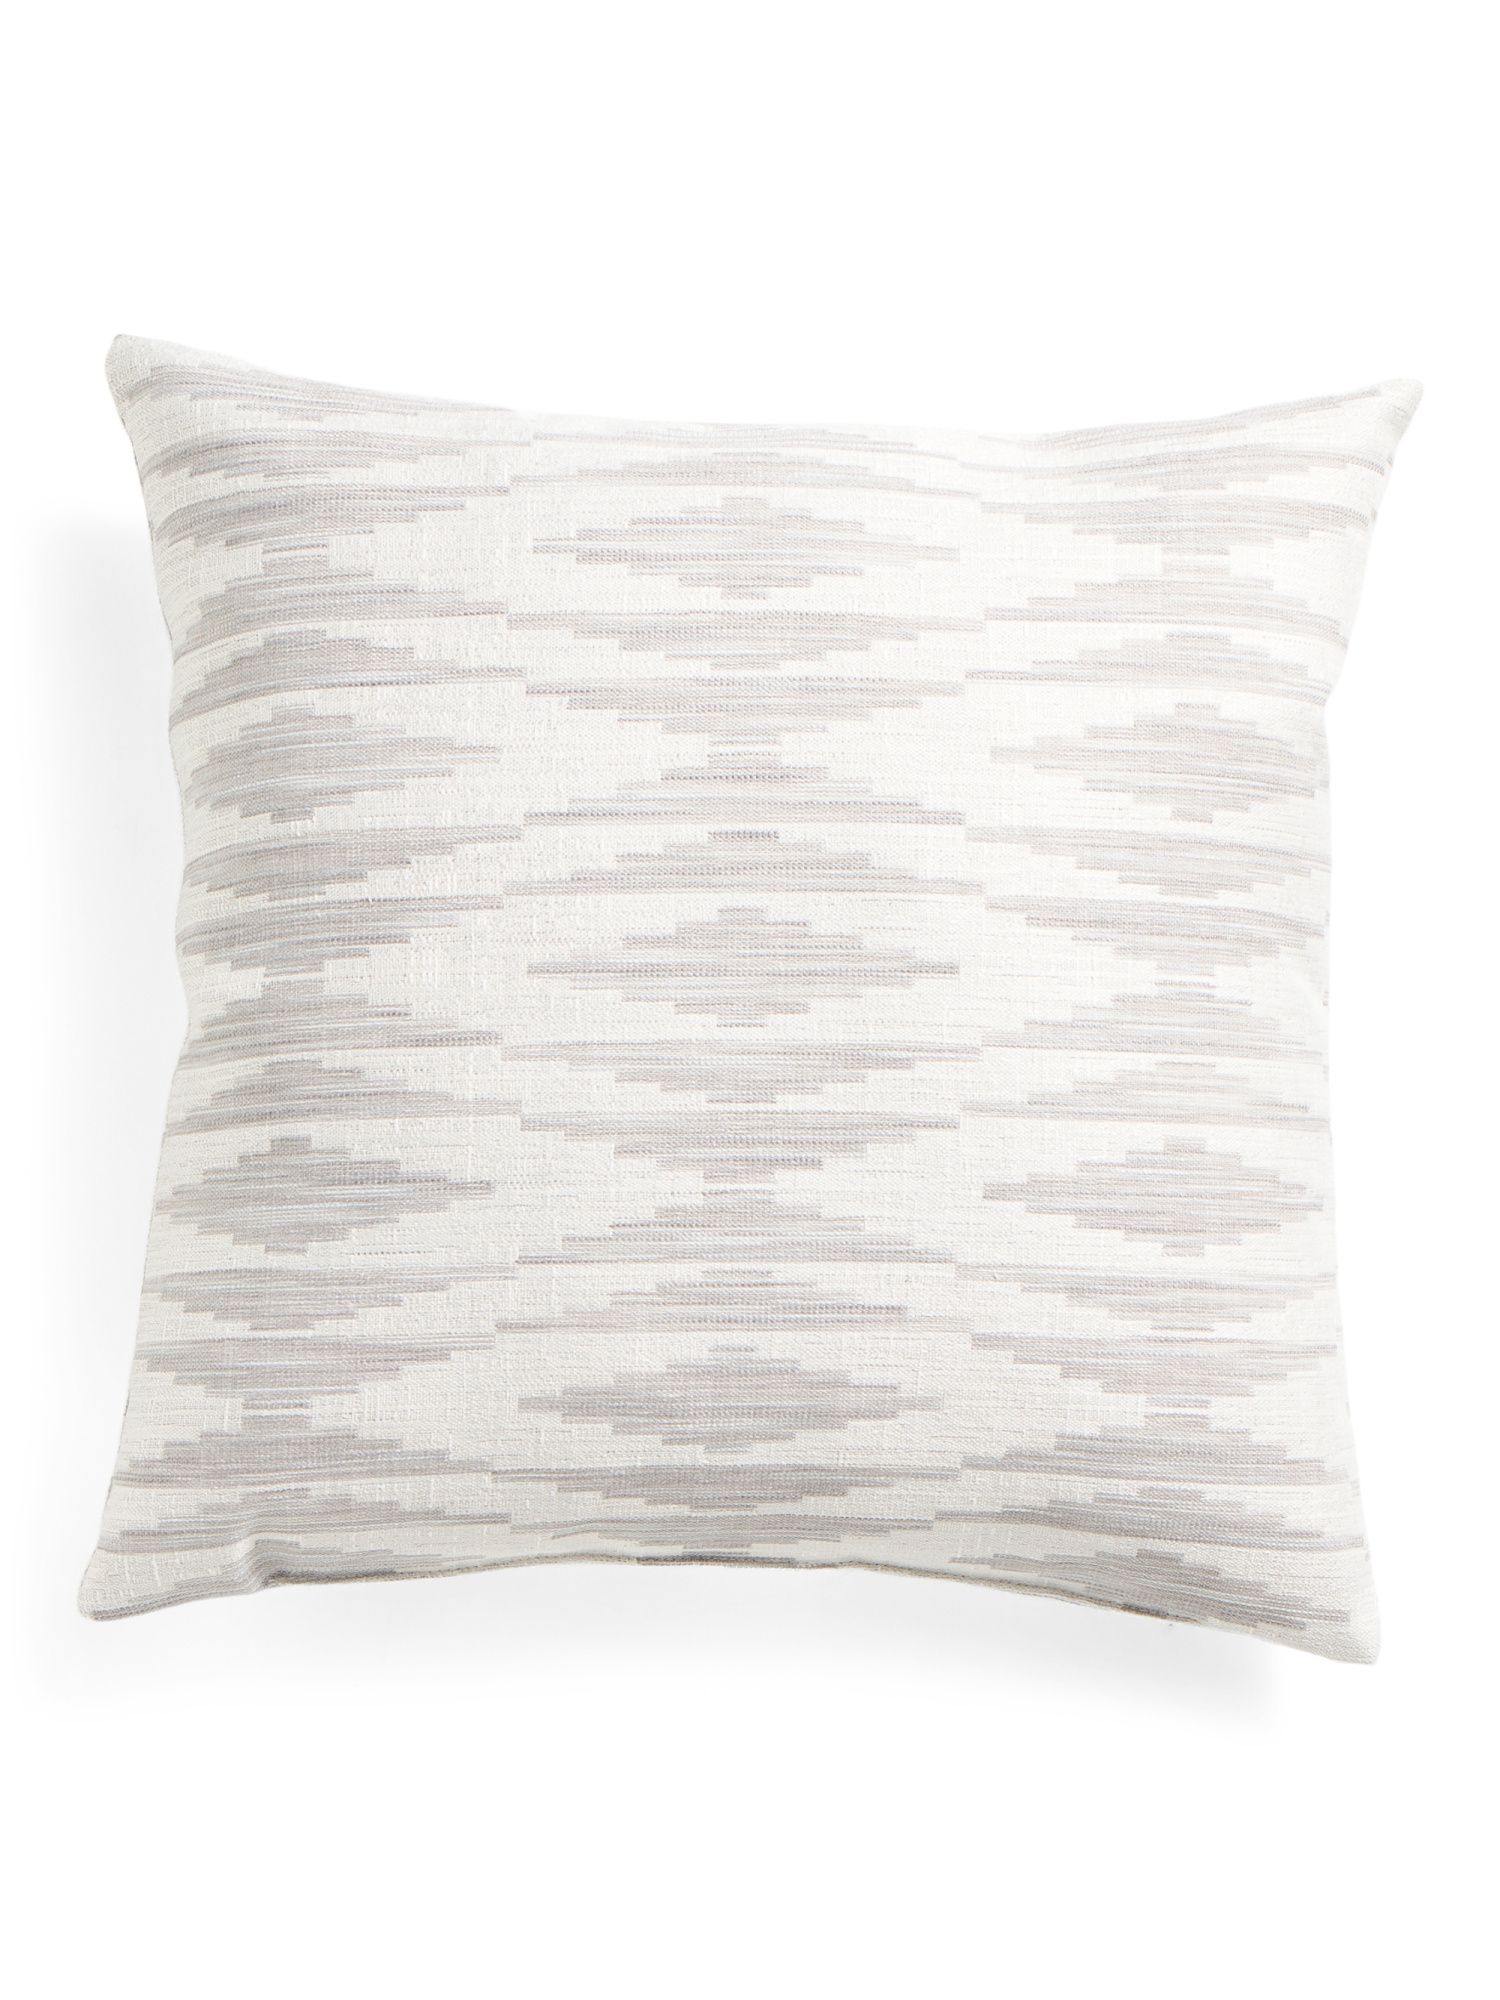 Made In Usa 22x22 Patterned Pillow | Home | Marshalls | Marshalls